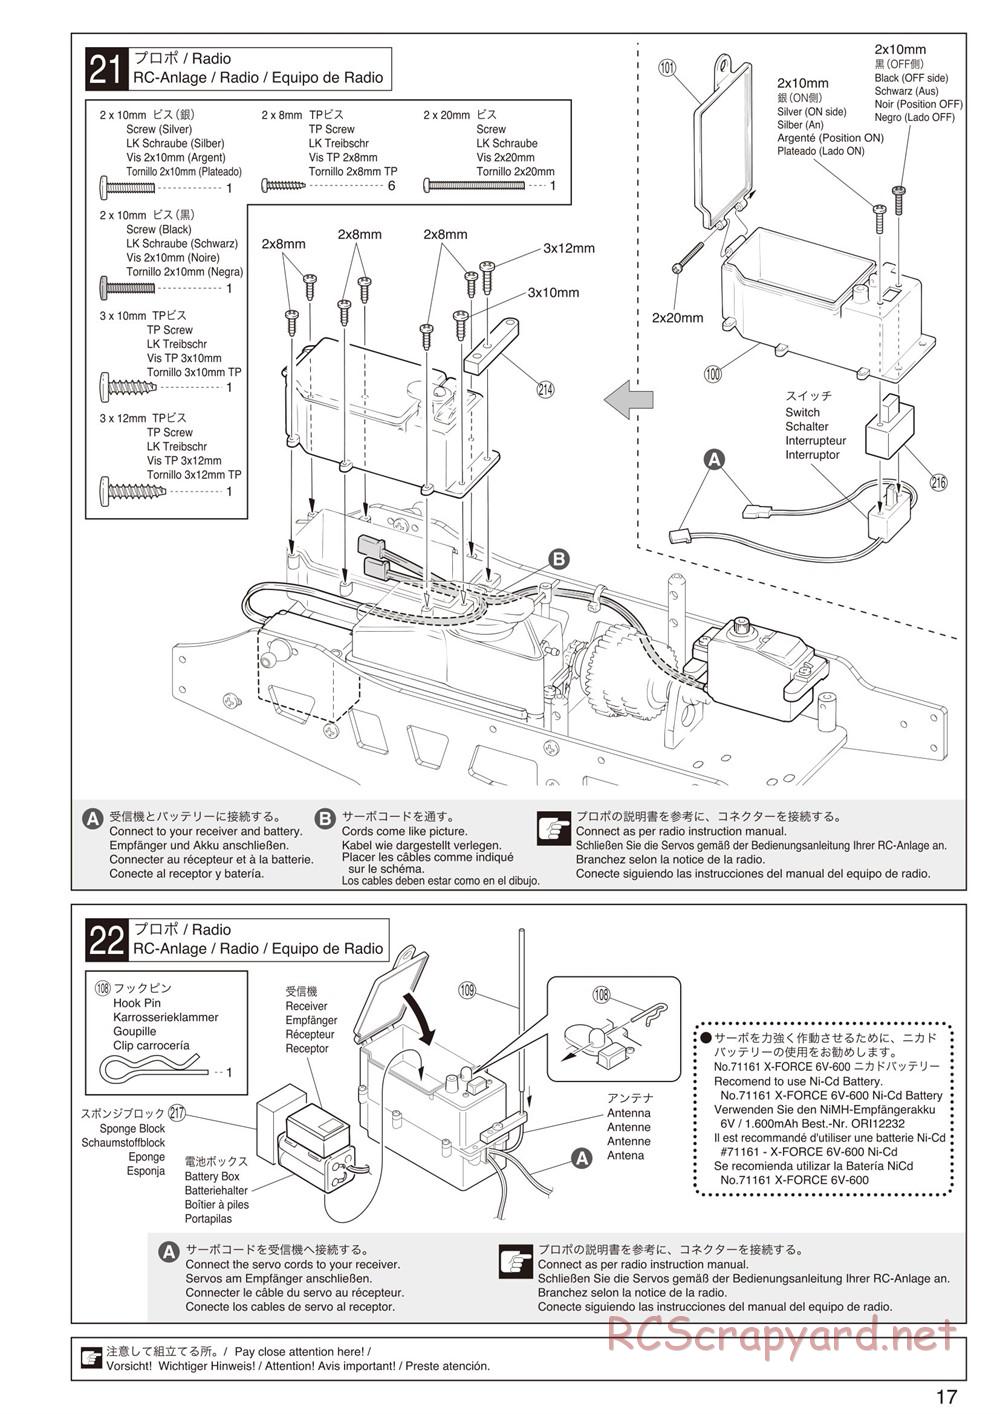 Kyosho - Mad Force Cruiser - Manual - Page 17